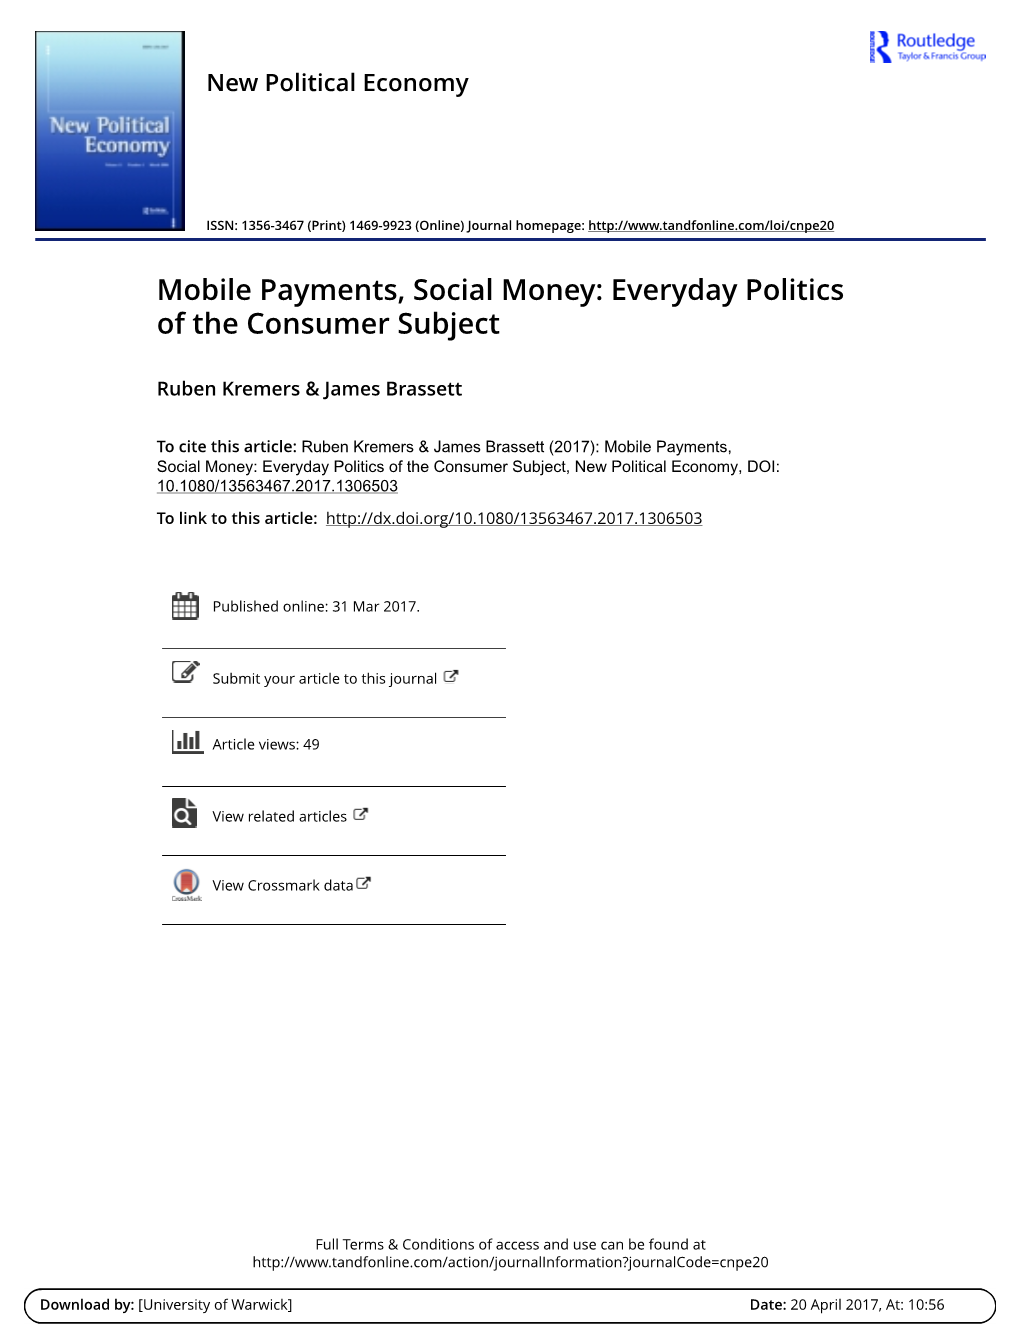 Mobile Payments, Social Money: Everyday Politics of the Consumer Subject